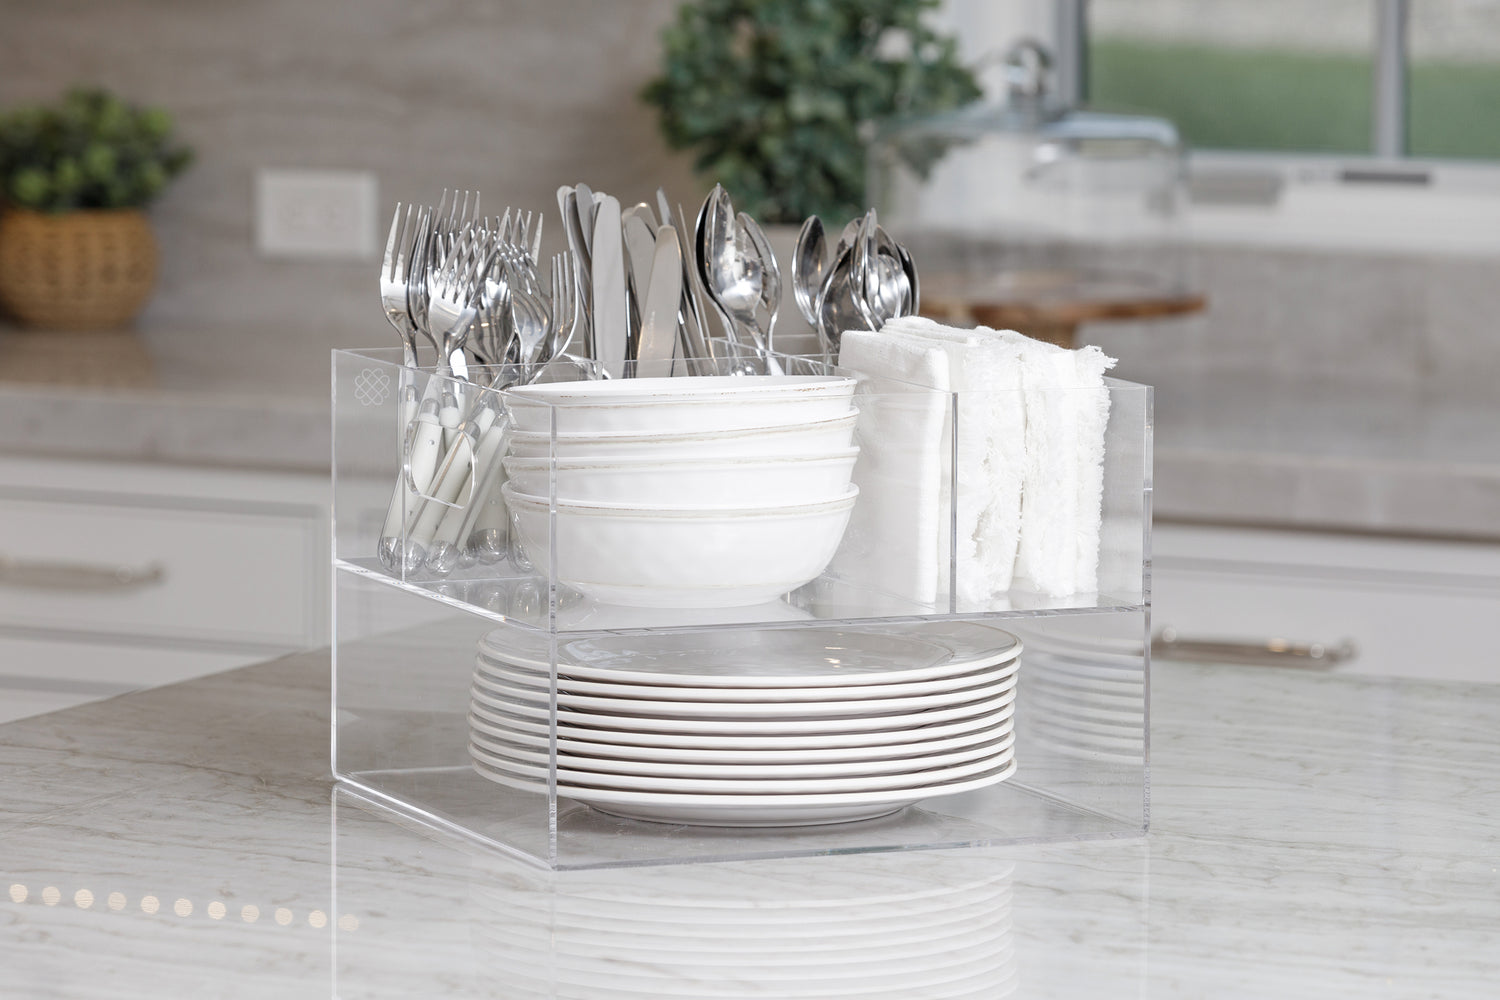 Acrylic Utensil Caddy ready for a party with white dishes, silverware, and napkins.